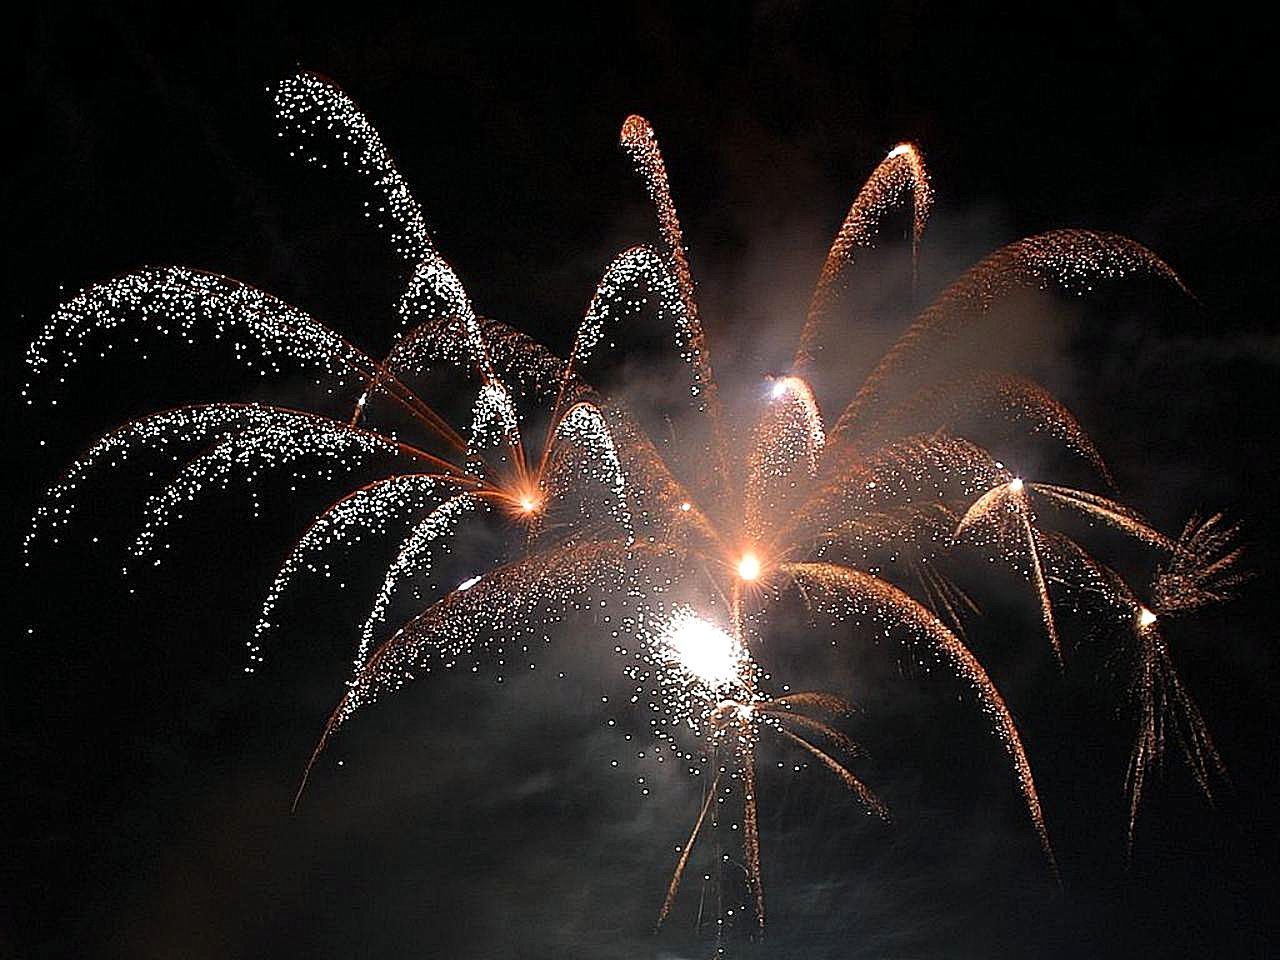 Ring In 2016 With Prospect Park’s Fireworks Extravaganza